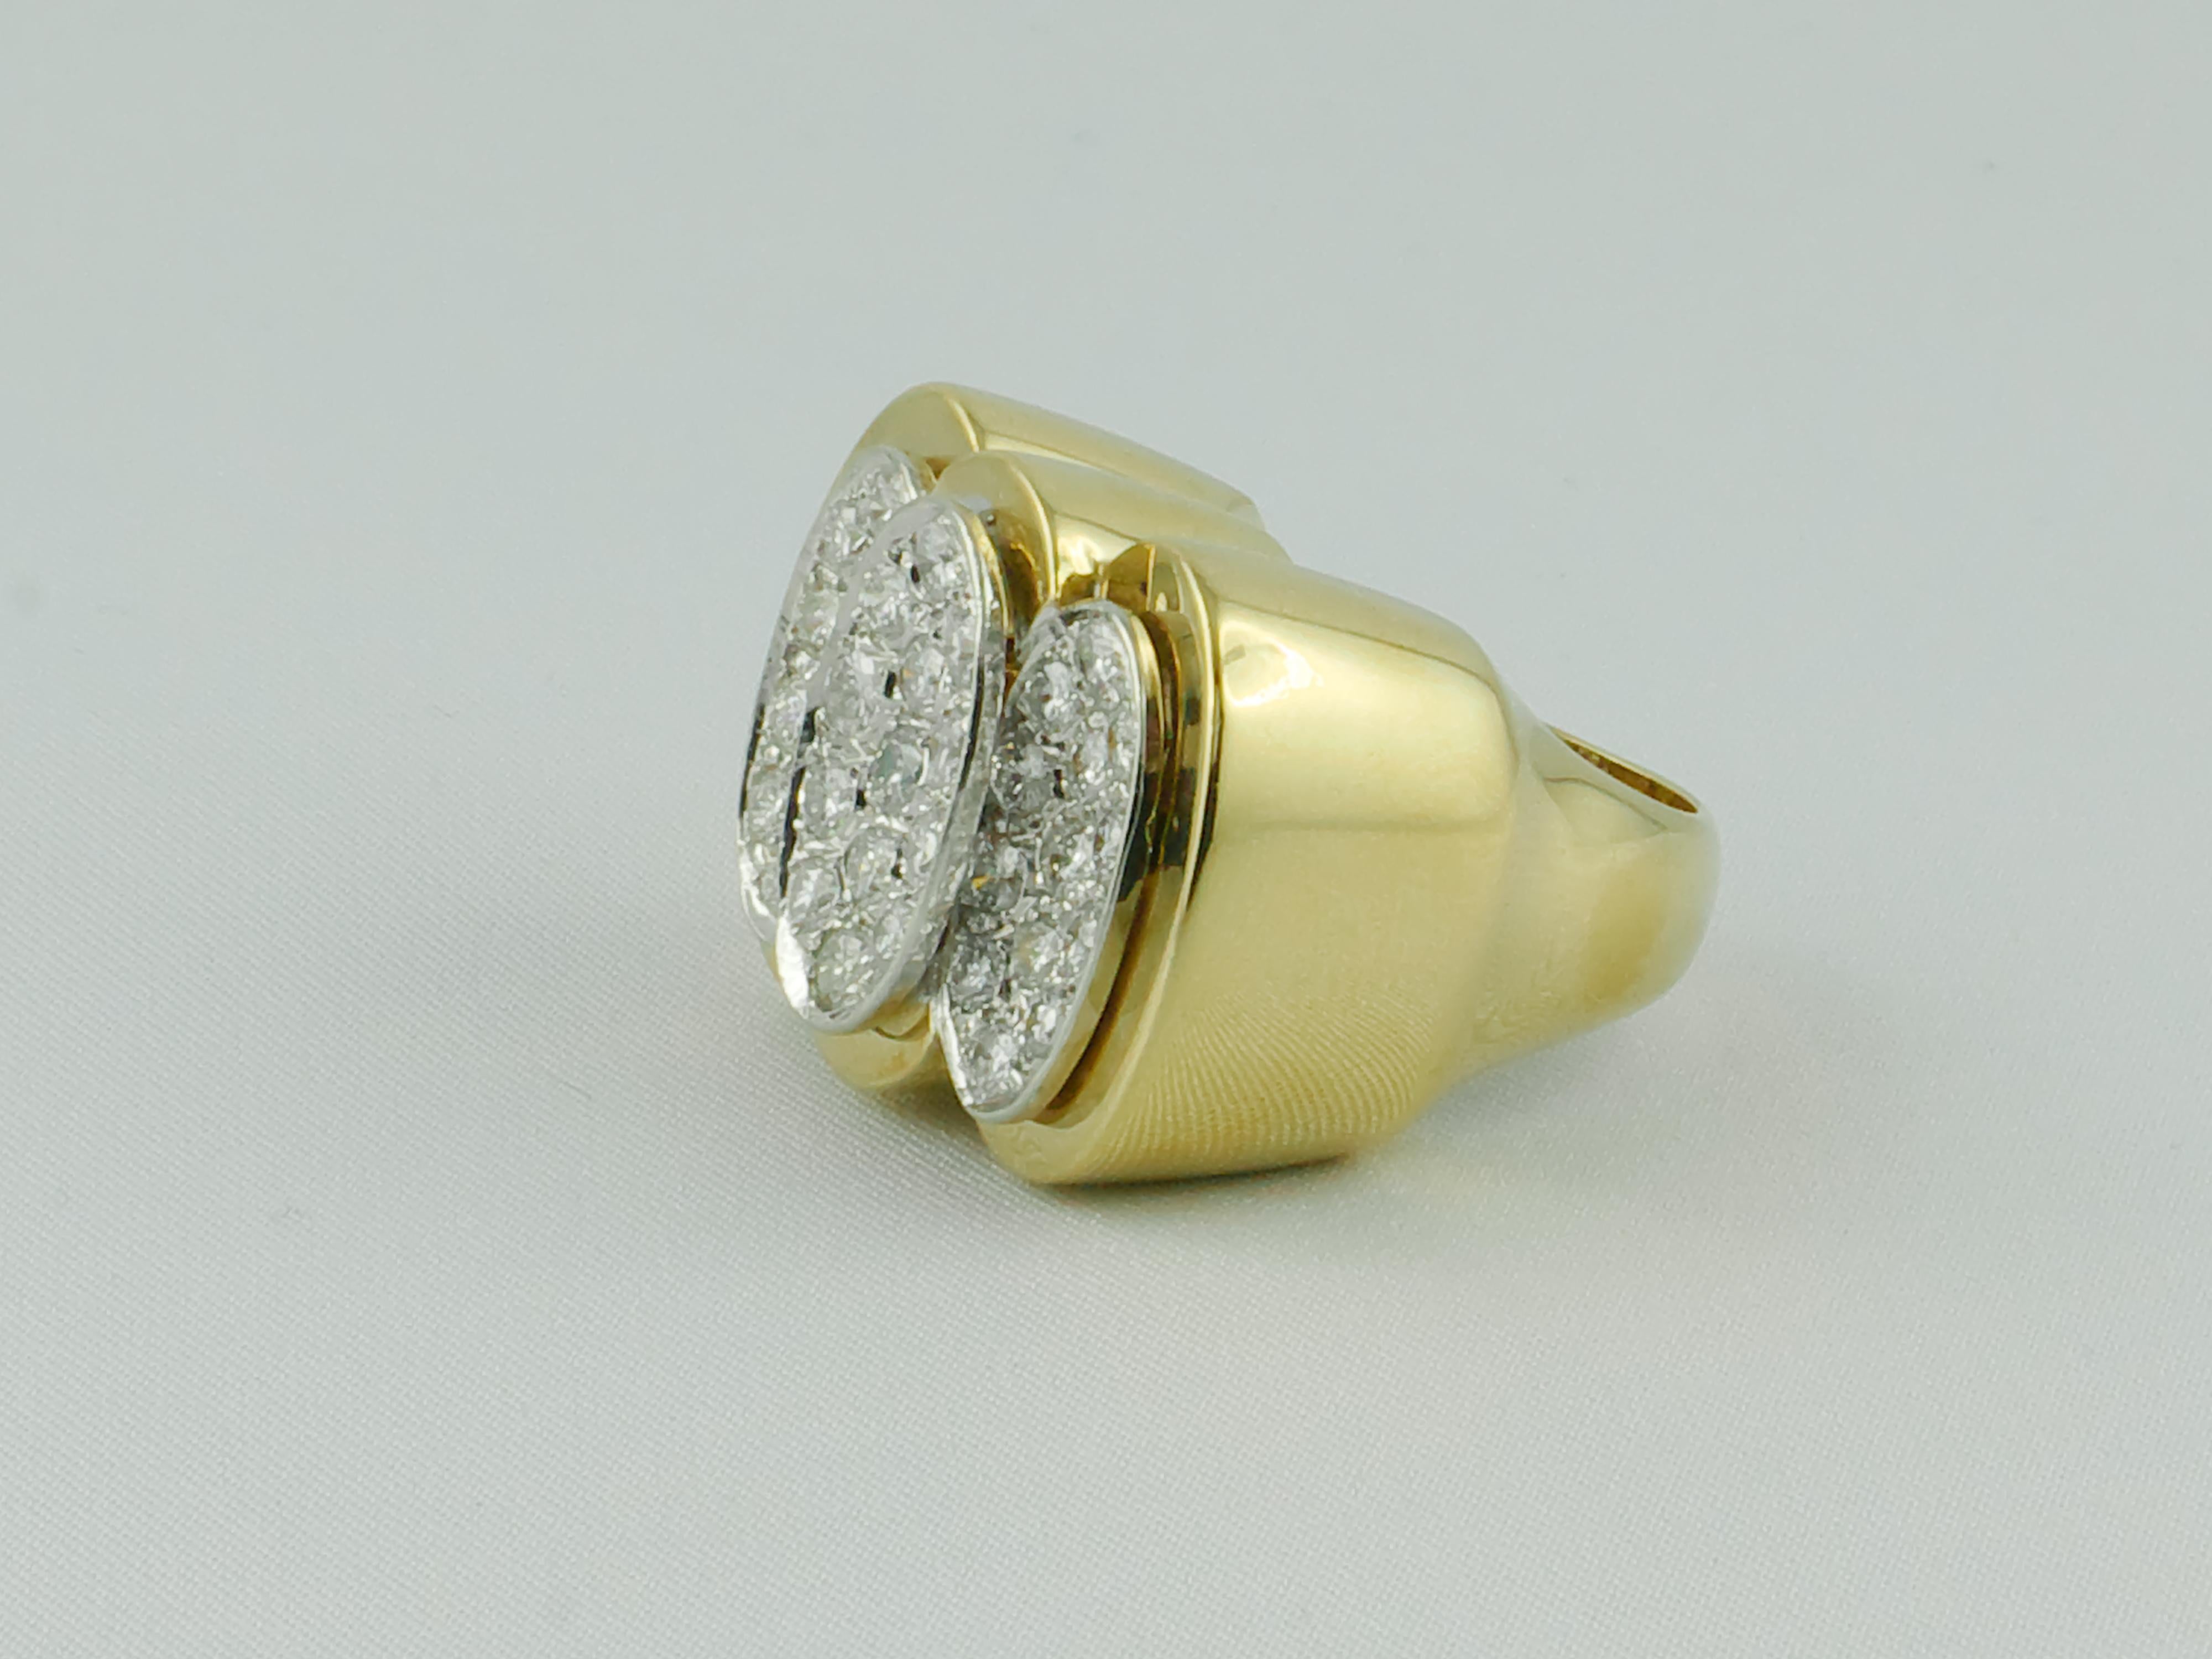 Imposing 1970s 18 karat Yellow Gold Diamond ring pavé set with approx. 2.30 bright white and sparkling round brilliant cut Diamonds 
The unconventional three oval shape pavé is eye-catching and gives the ring  a distintive and glamourous look
Size 6